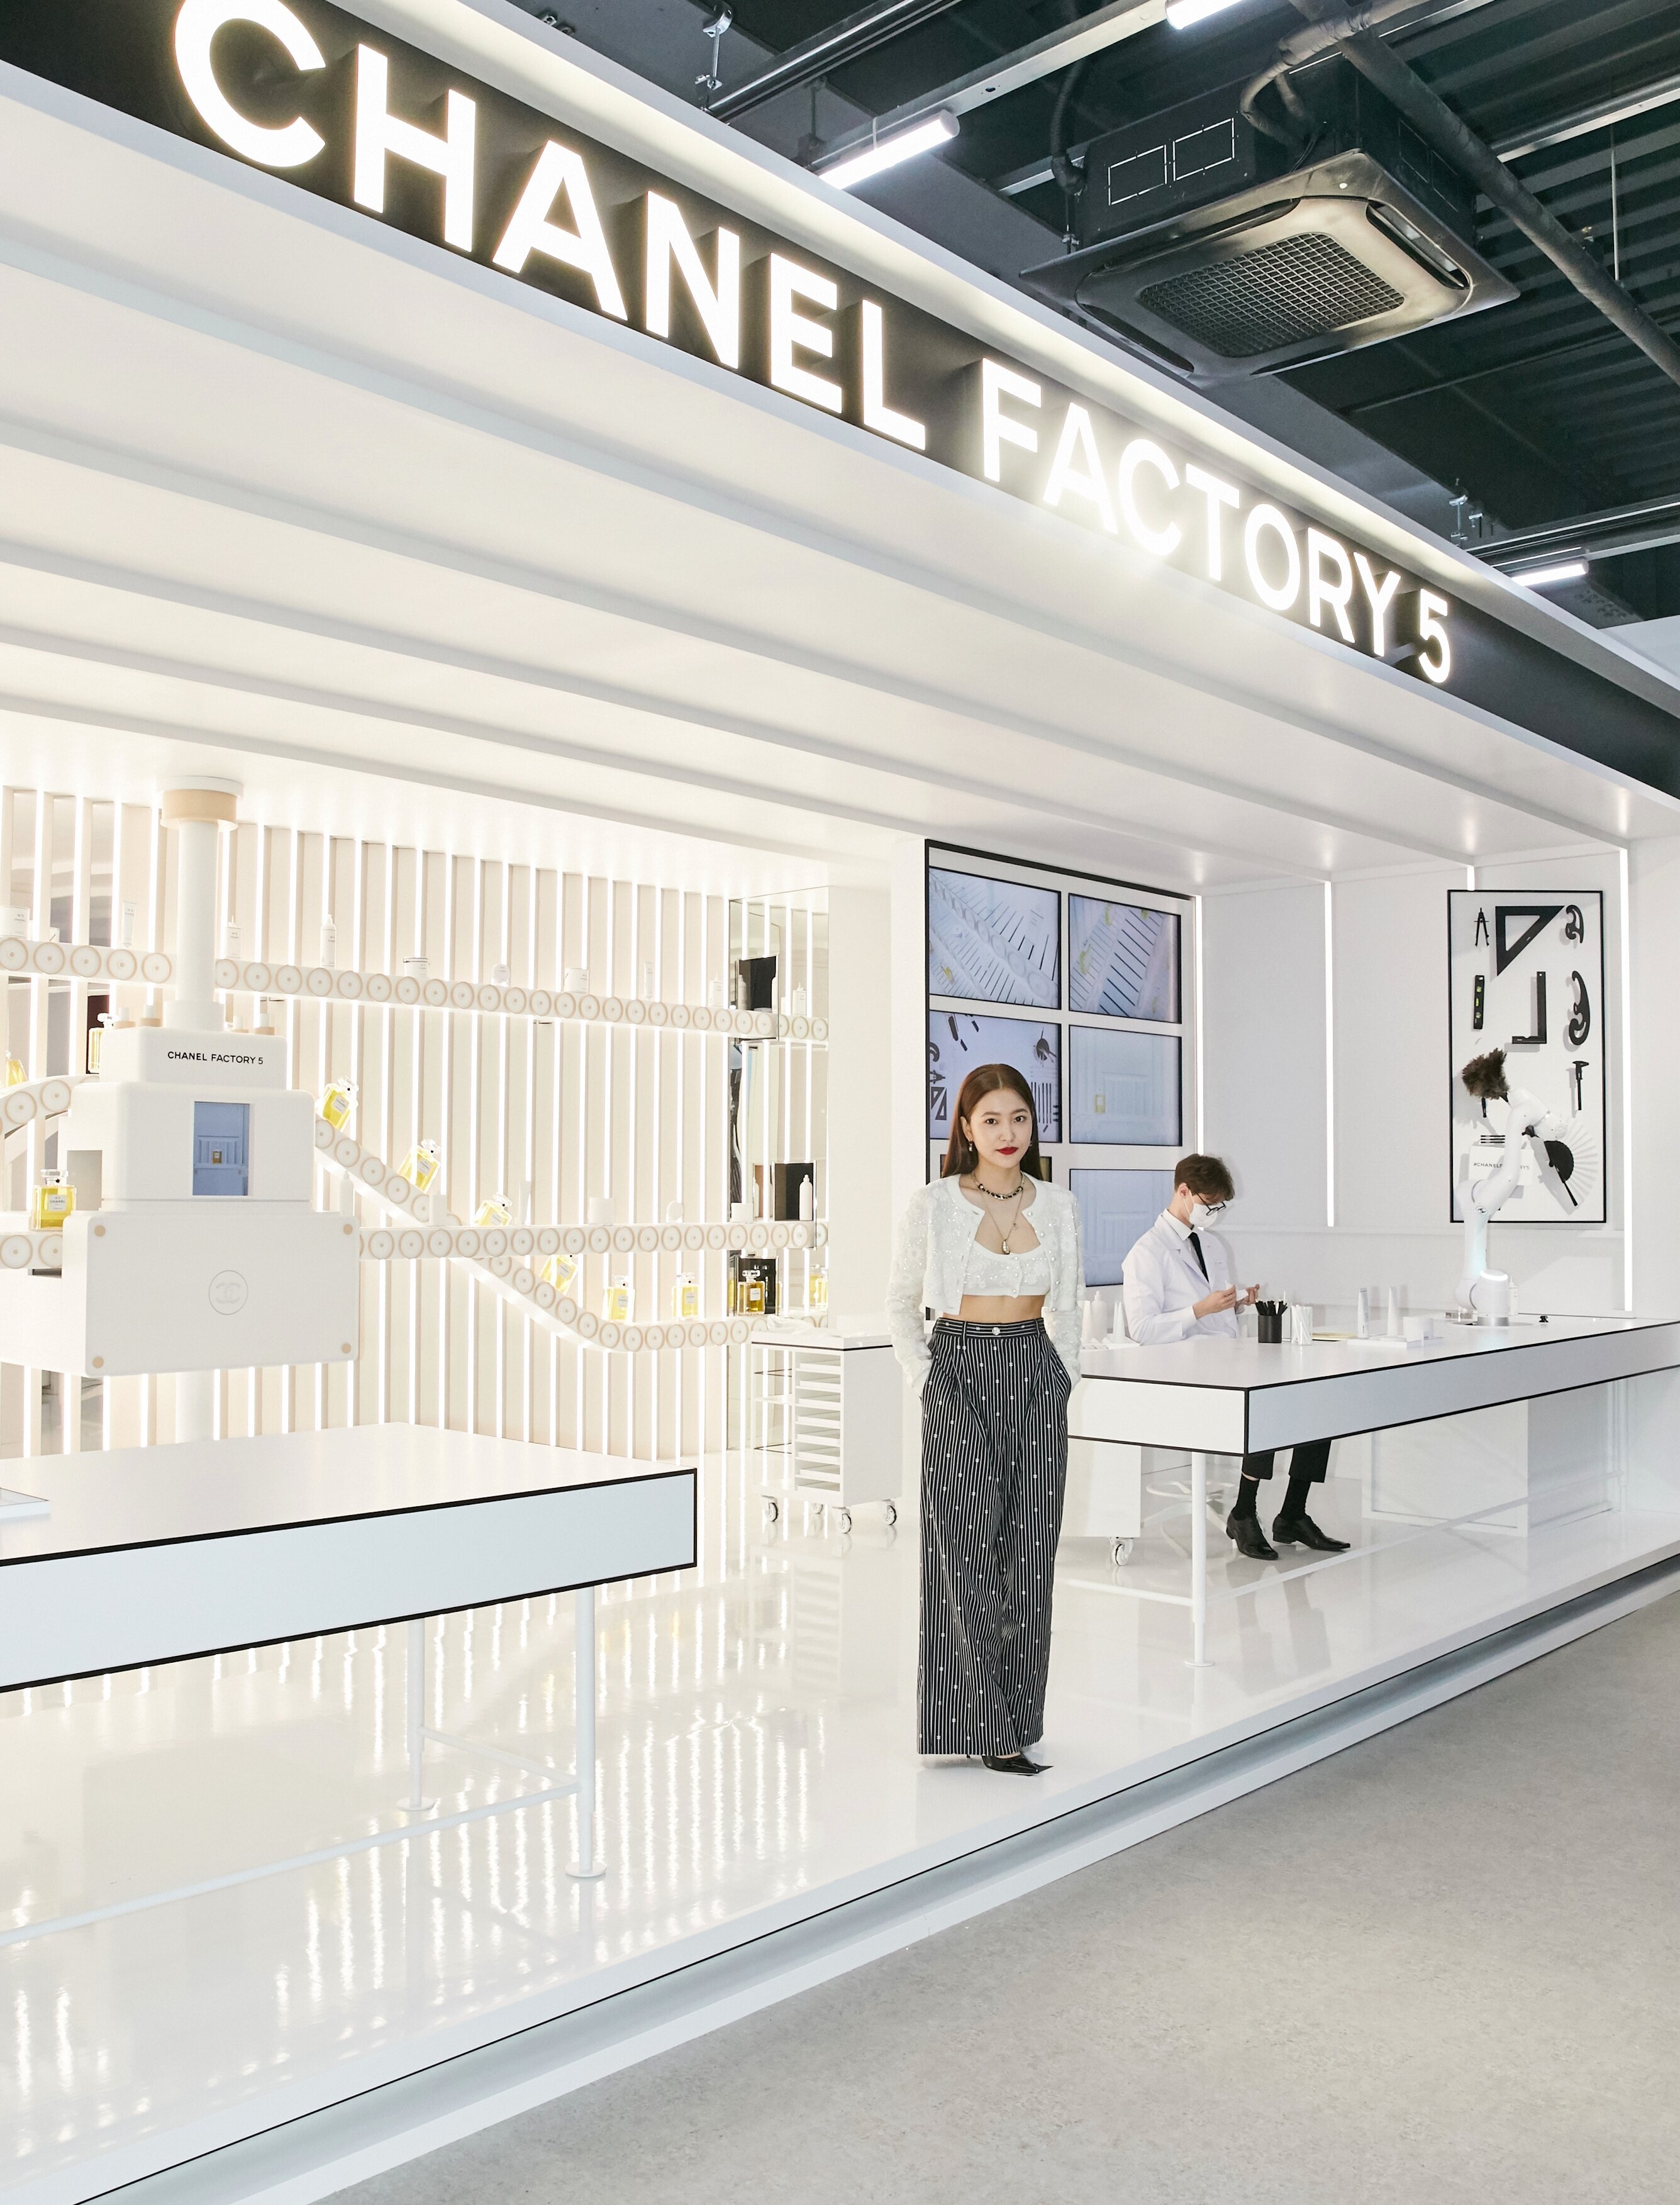 Chanel celebrate 100th anniversary of No. 5 with Chanel Factory 5 Collection  • Basenotes